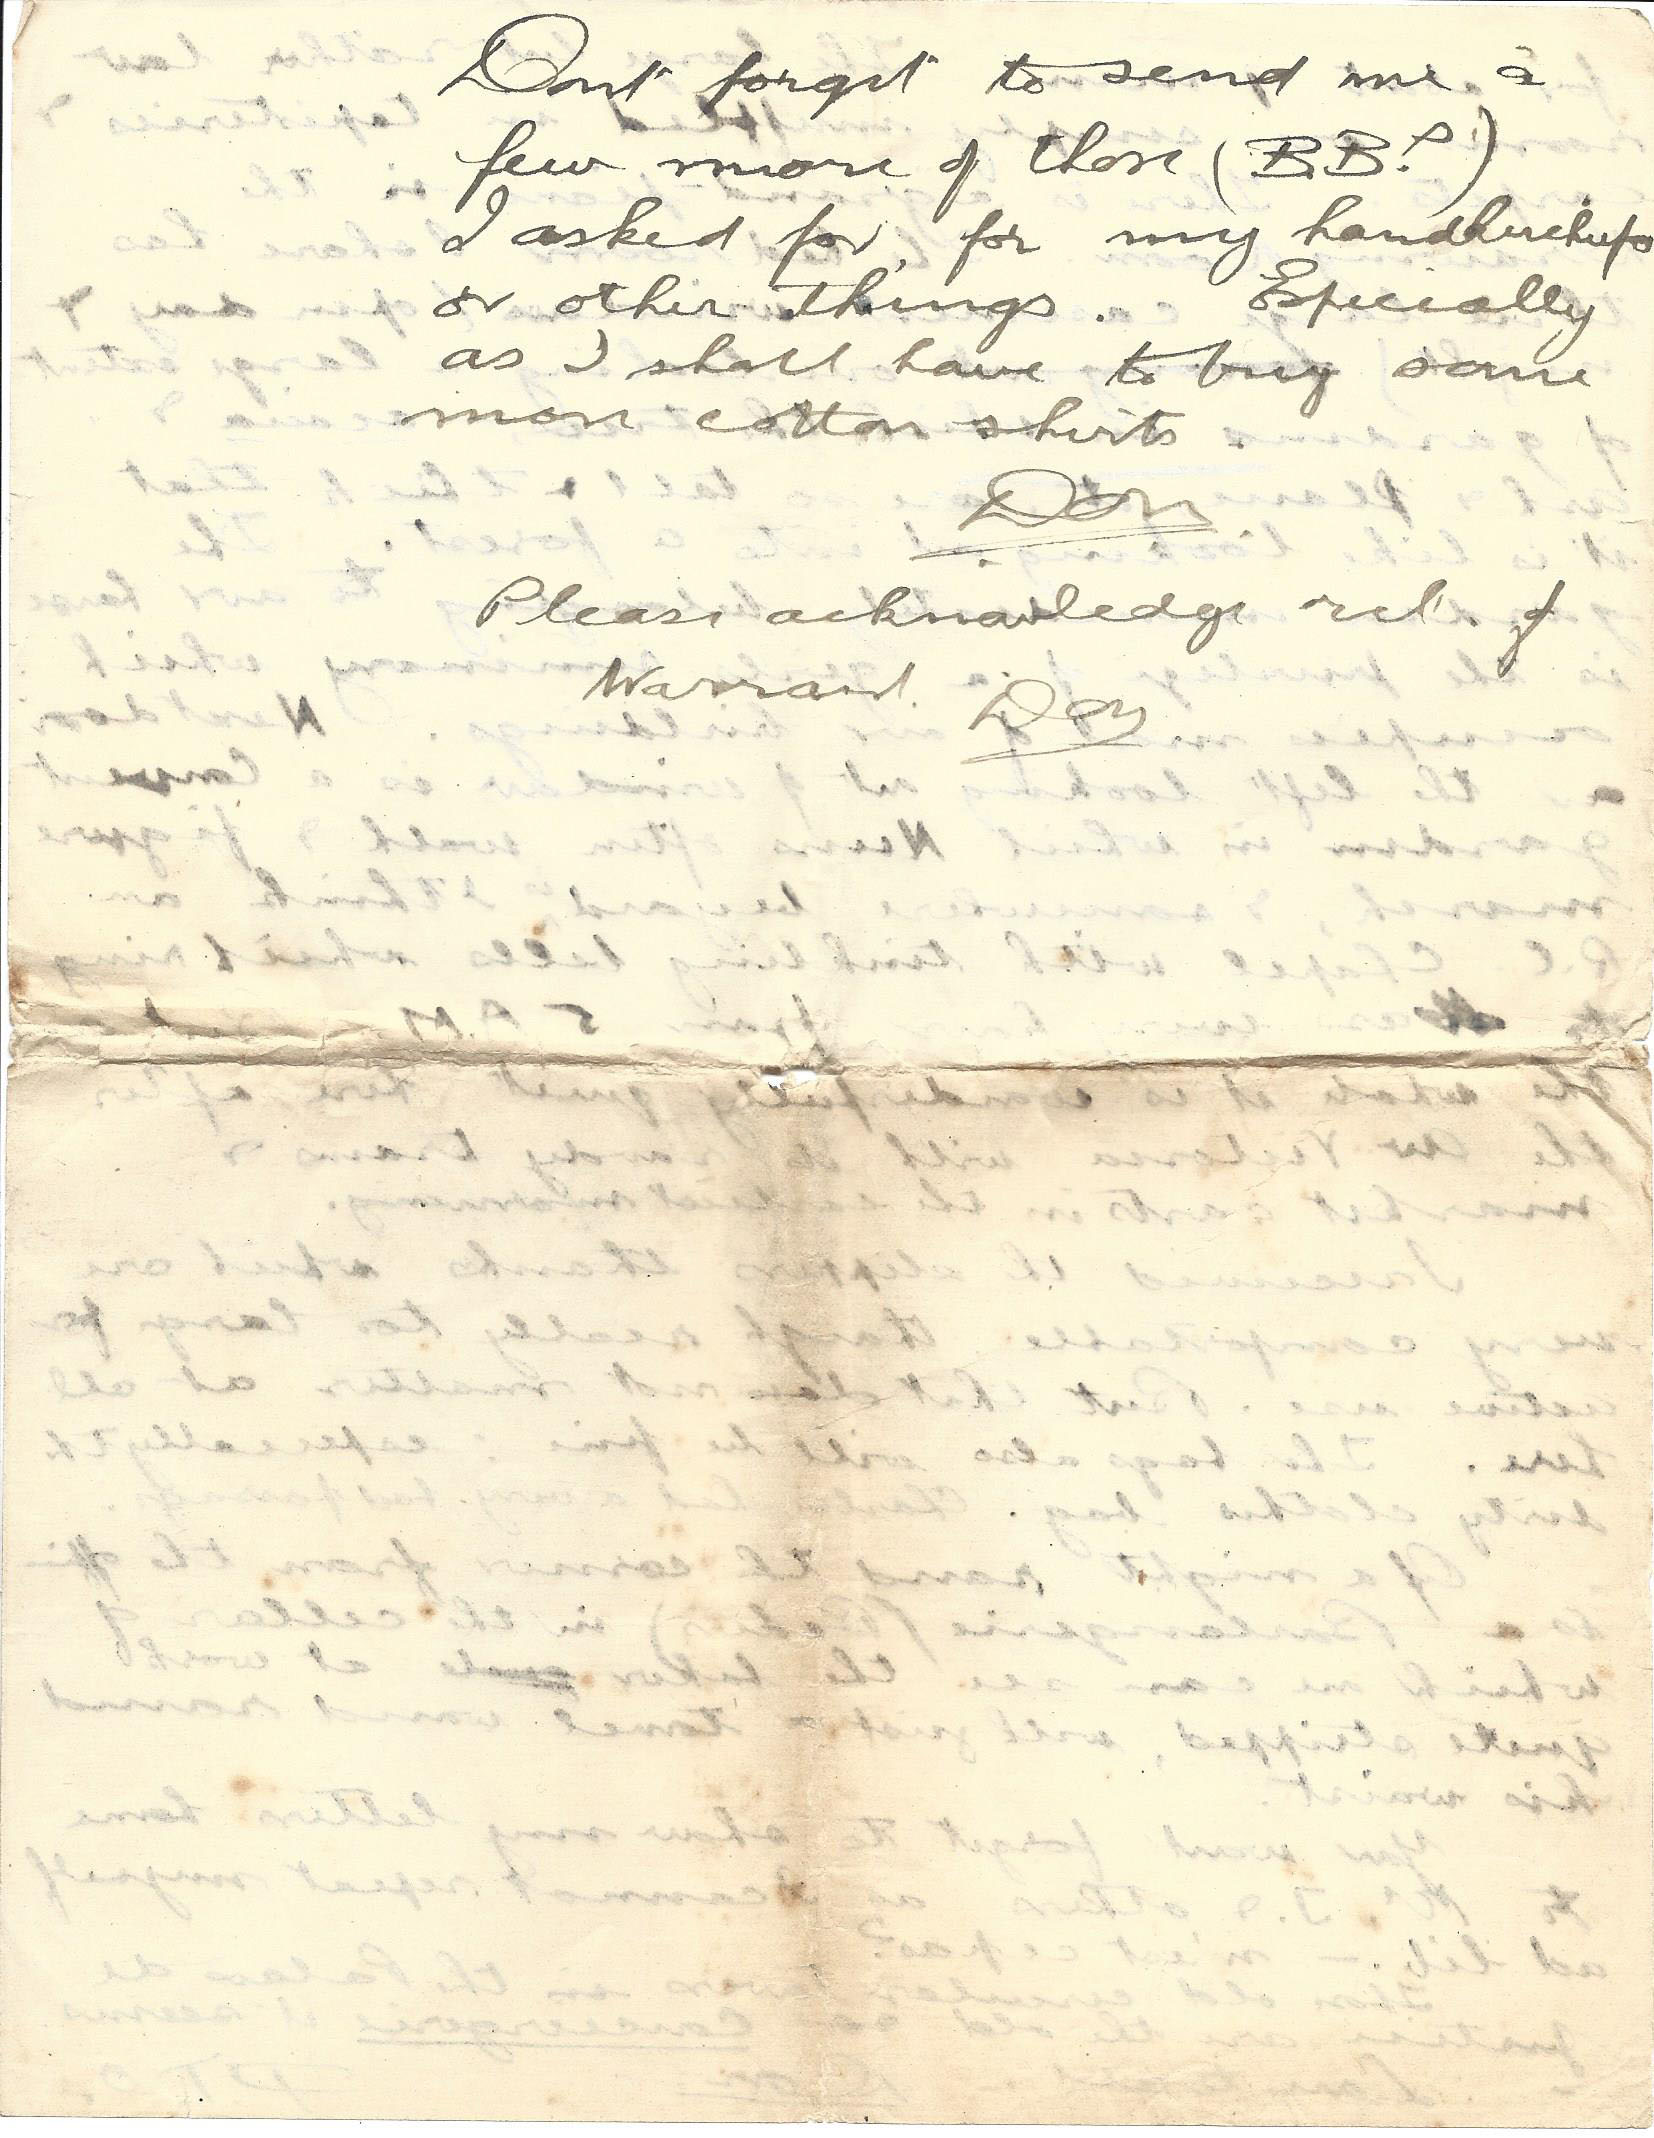 1919-07-25 p3 Donald Bearman letter to his father